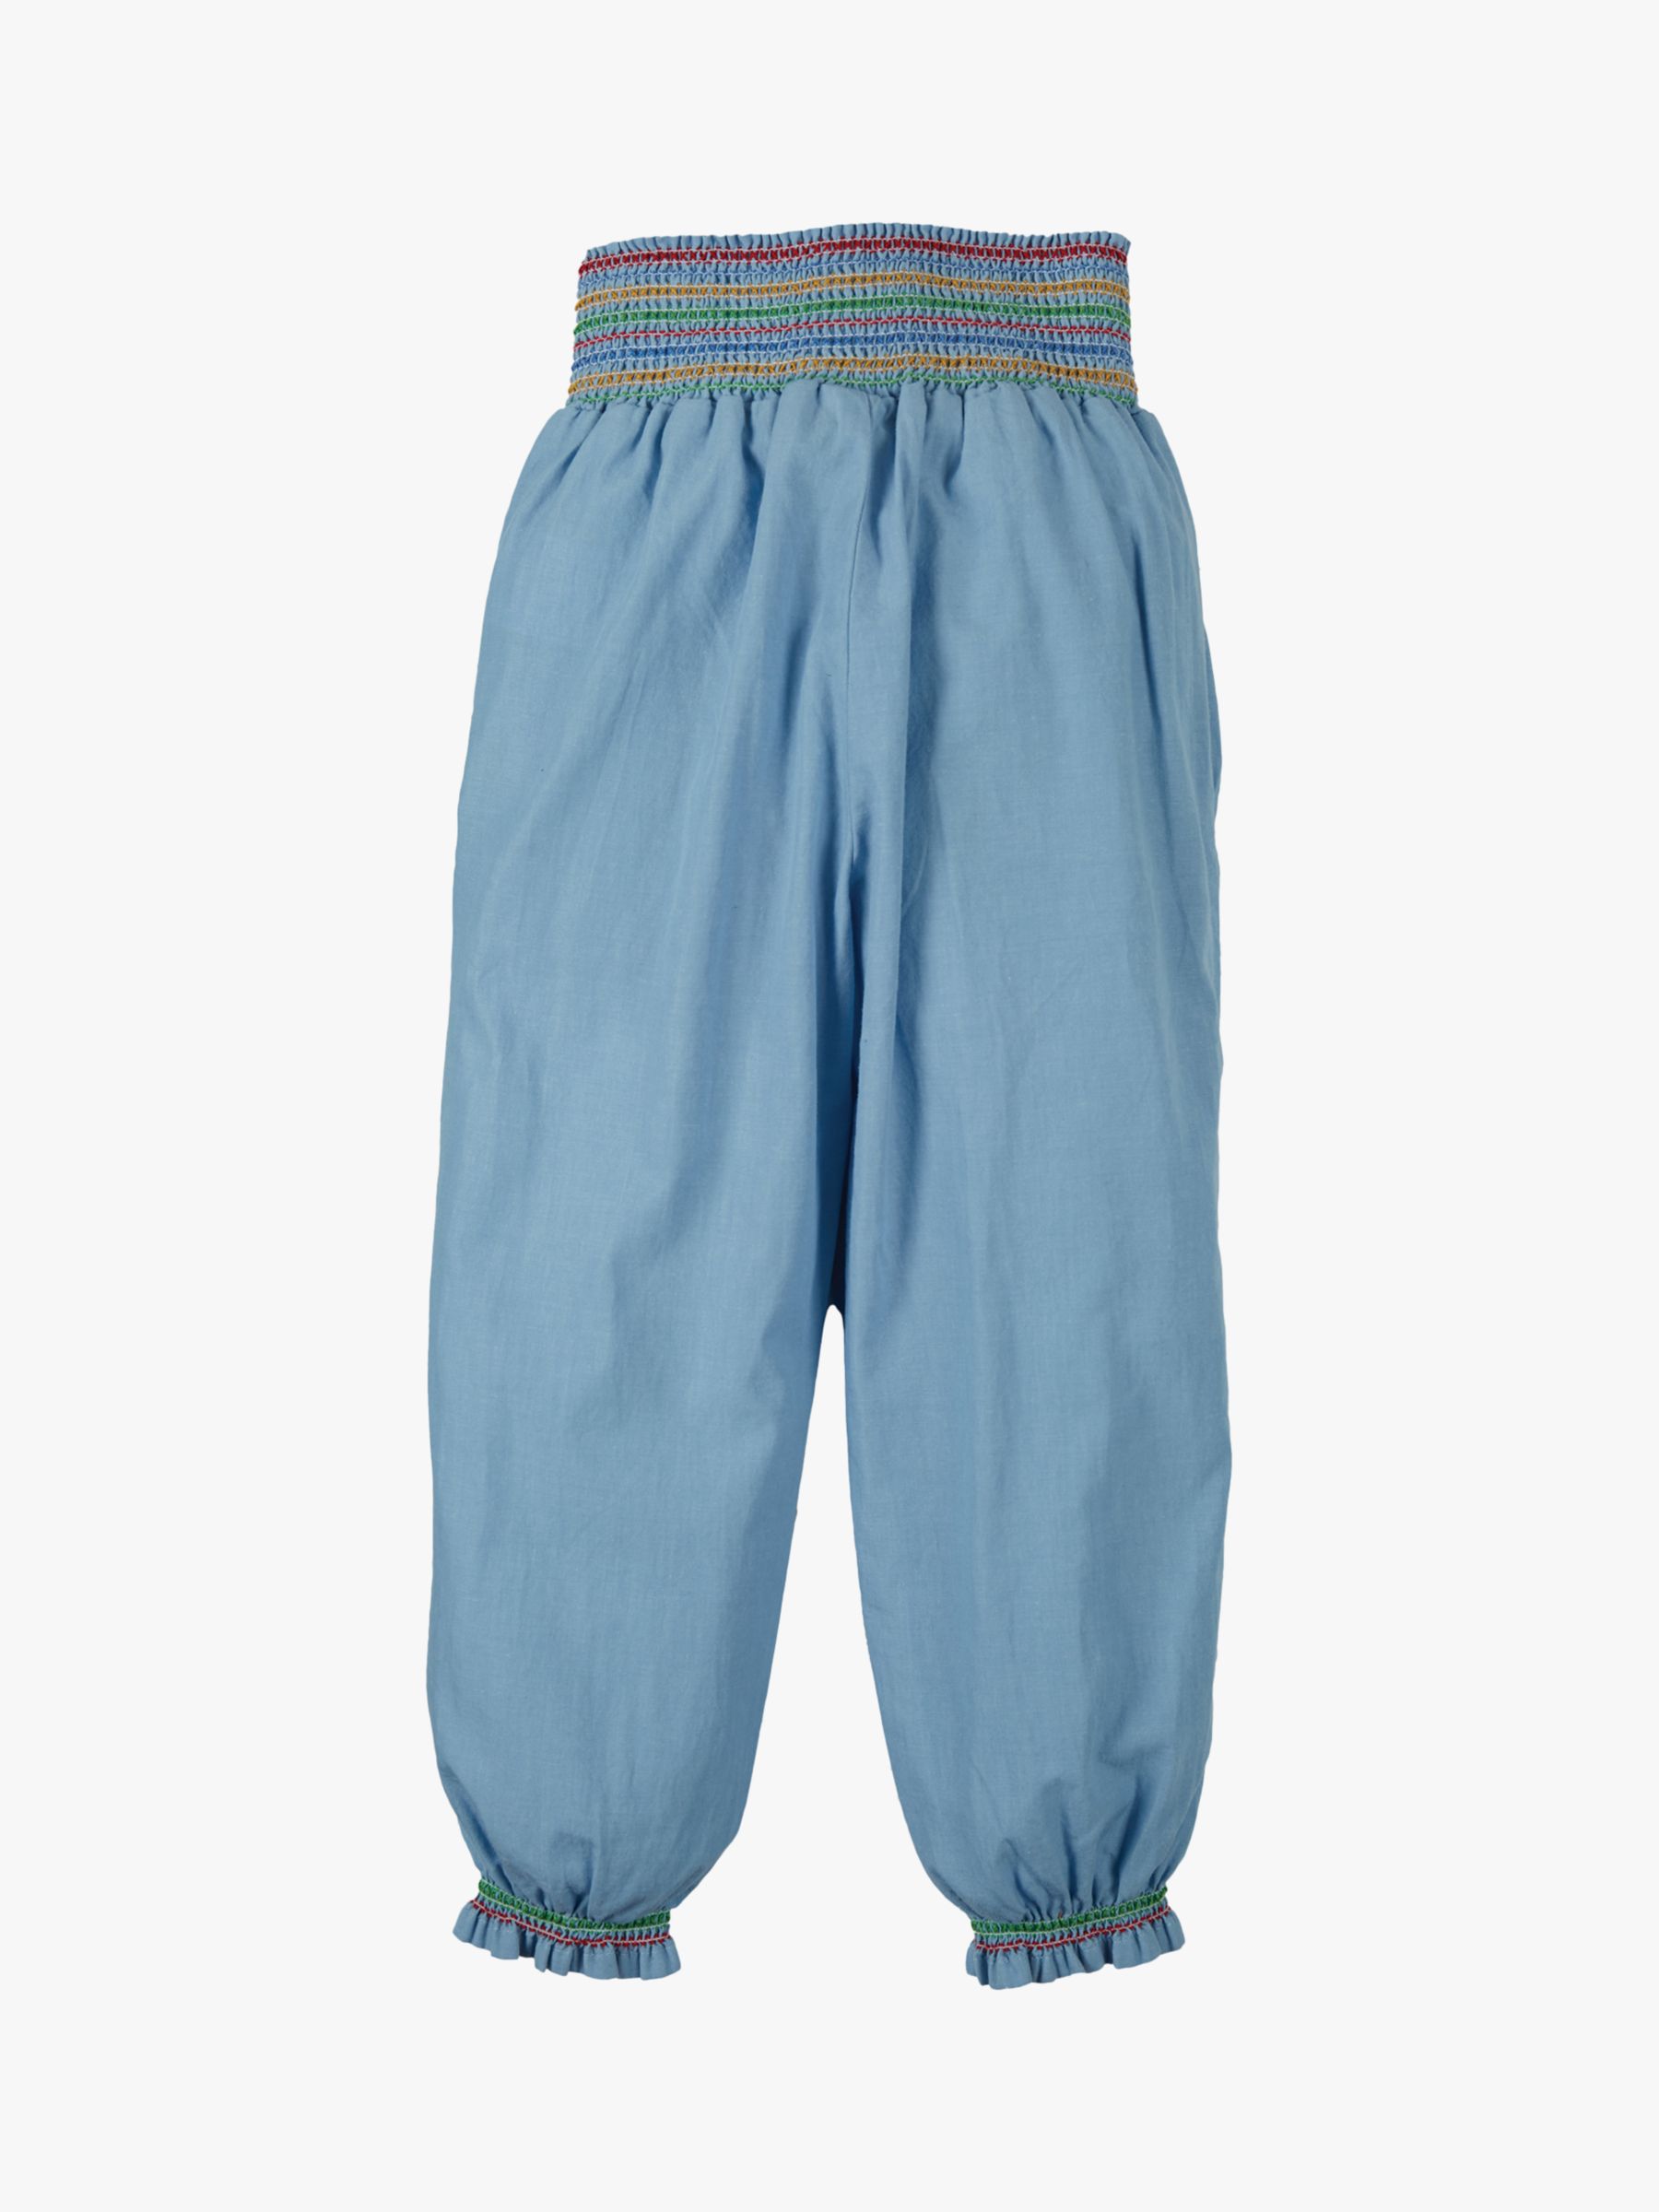 Frugi Kids' Hermione Organic Cotton Harem Trousers, Chambray, 7-8 years